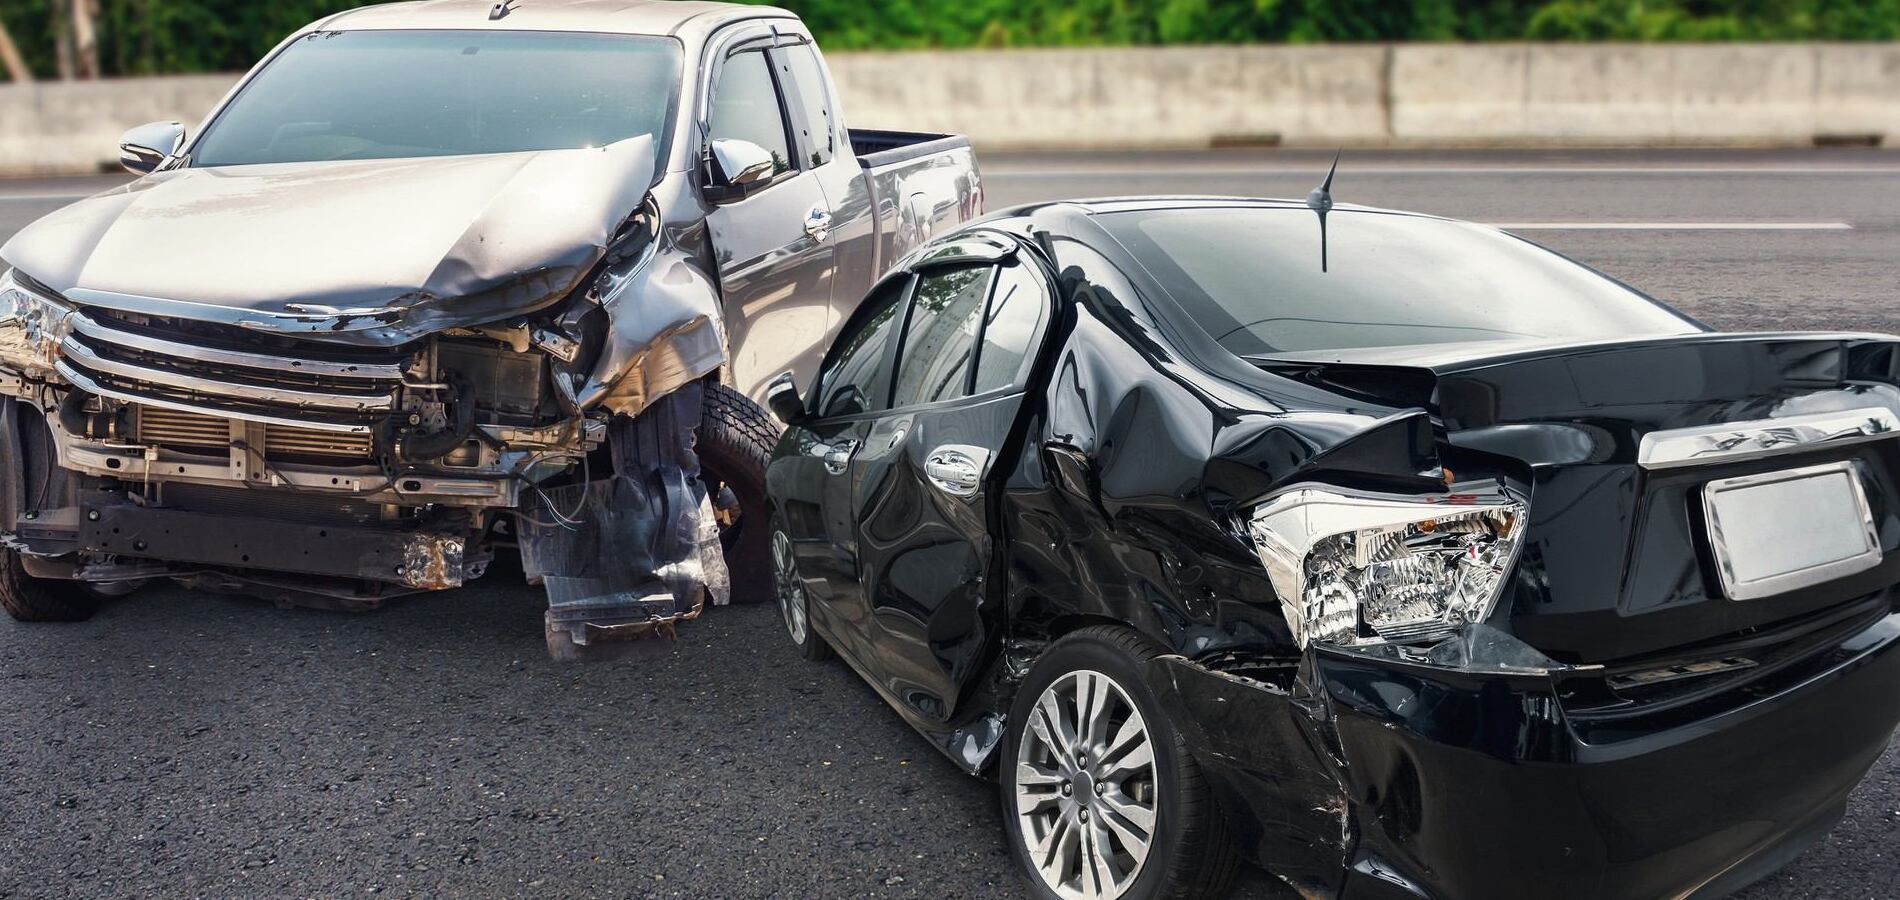 Car Accident Lawyer in Placentia, CA